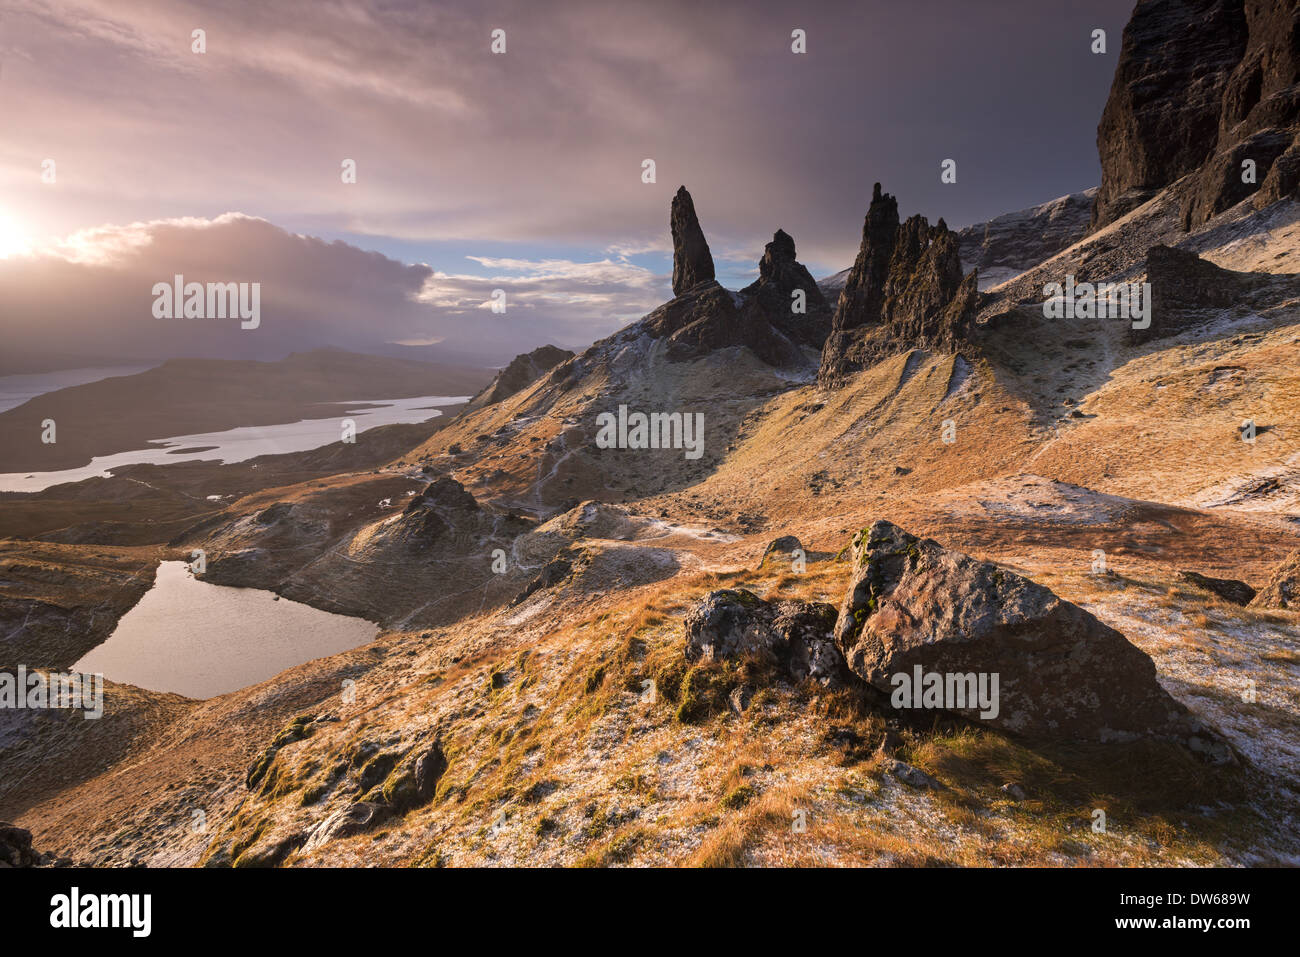 Dramatic scenery at the Old Man of Storr, Isle of Skye, Scotland. Winter (December) 2013. Stock Photo